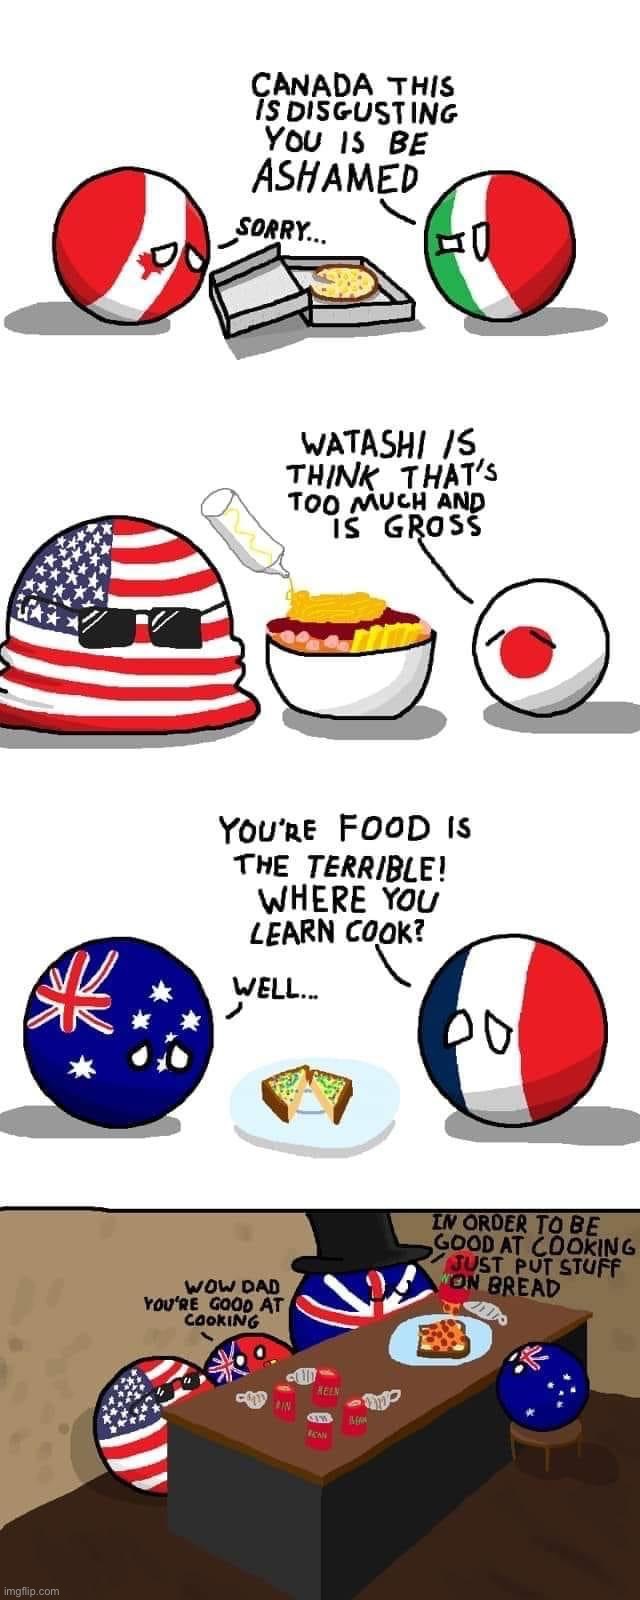 Anglophobia around the world | image tagged in an,glo,pho,bi,a,anglophobia | made w/ Imgflip meme maker